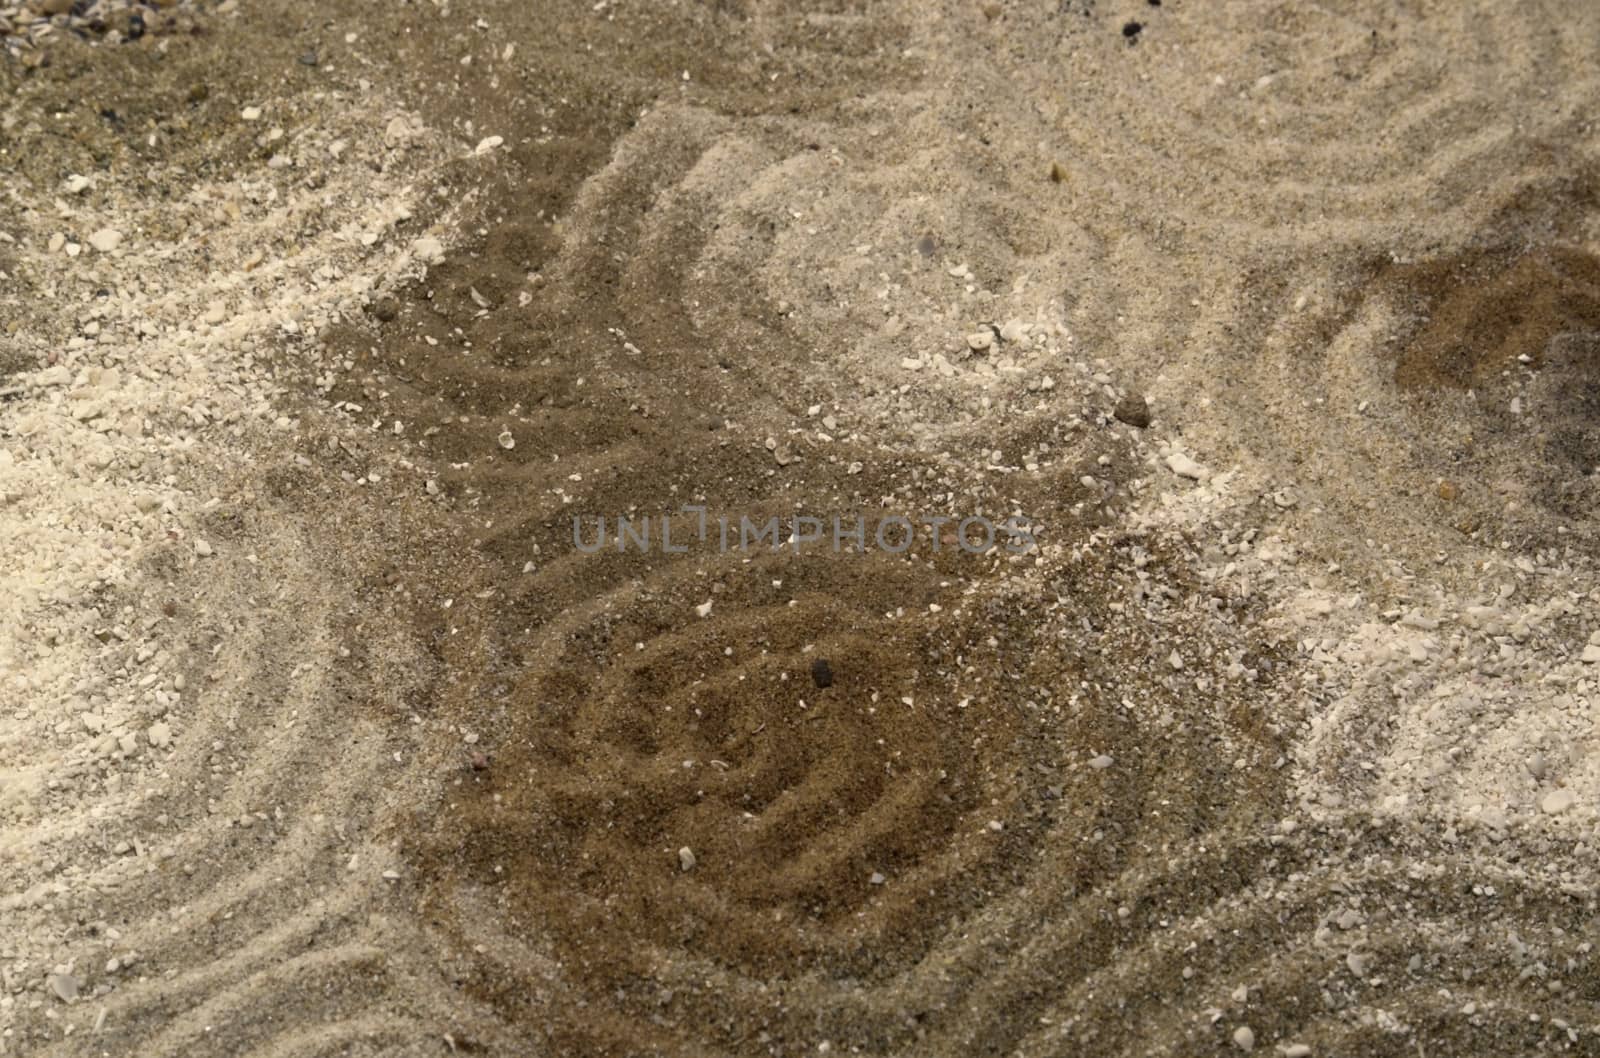 circles on multitoned brown sand surface by gewoldi